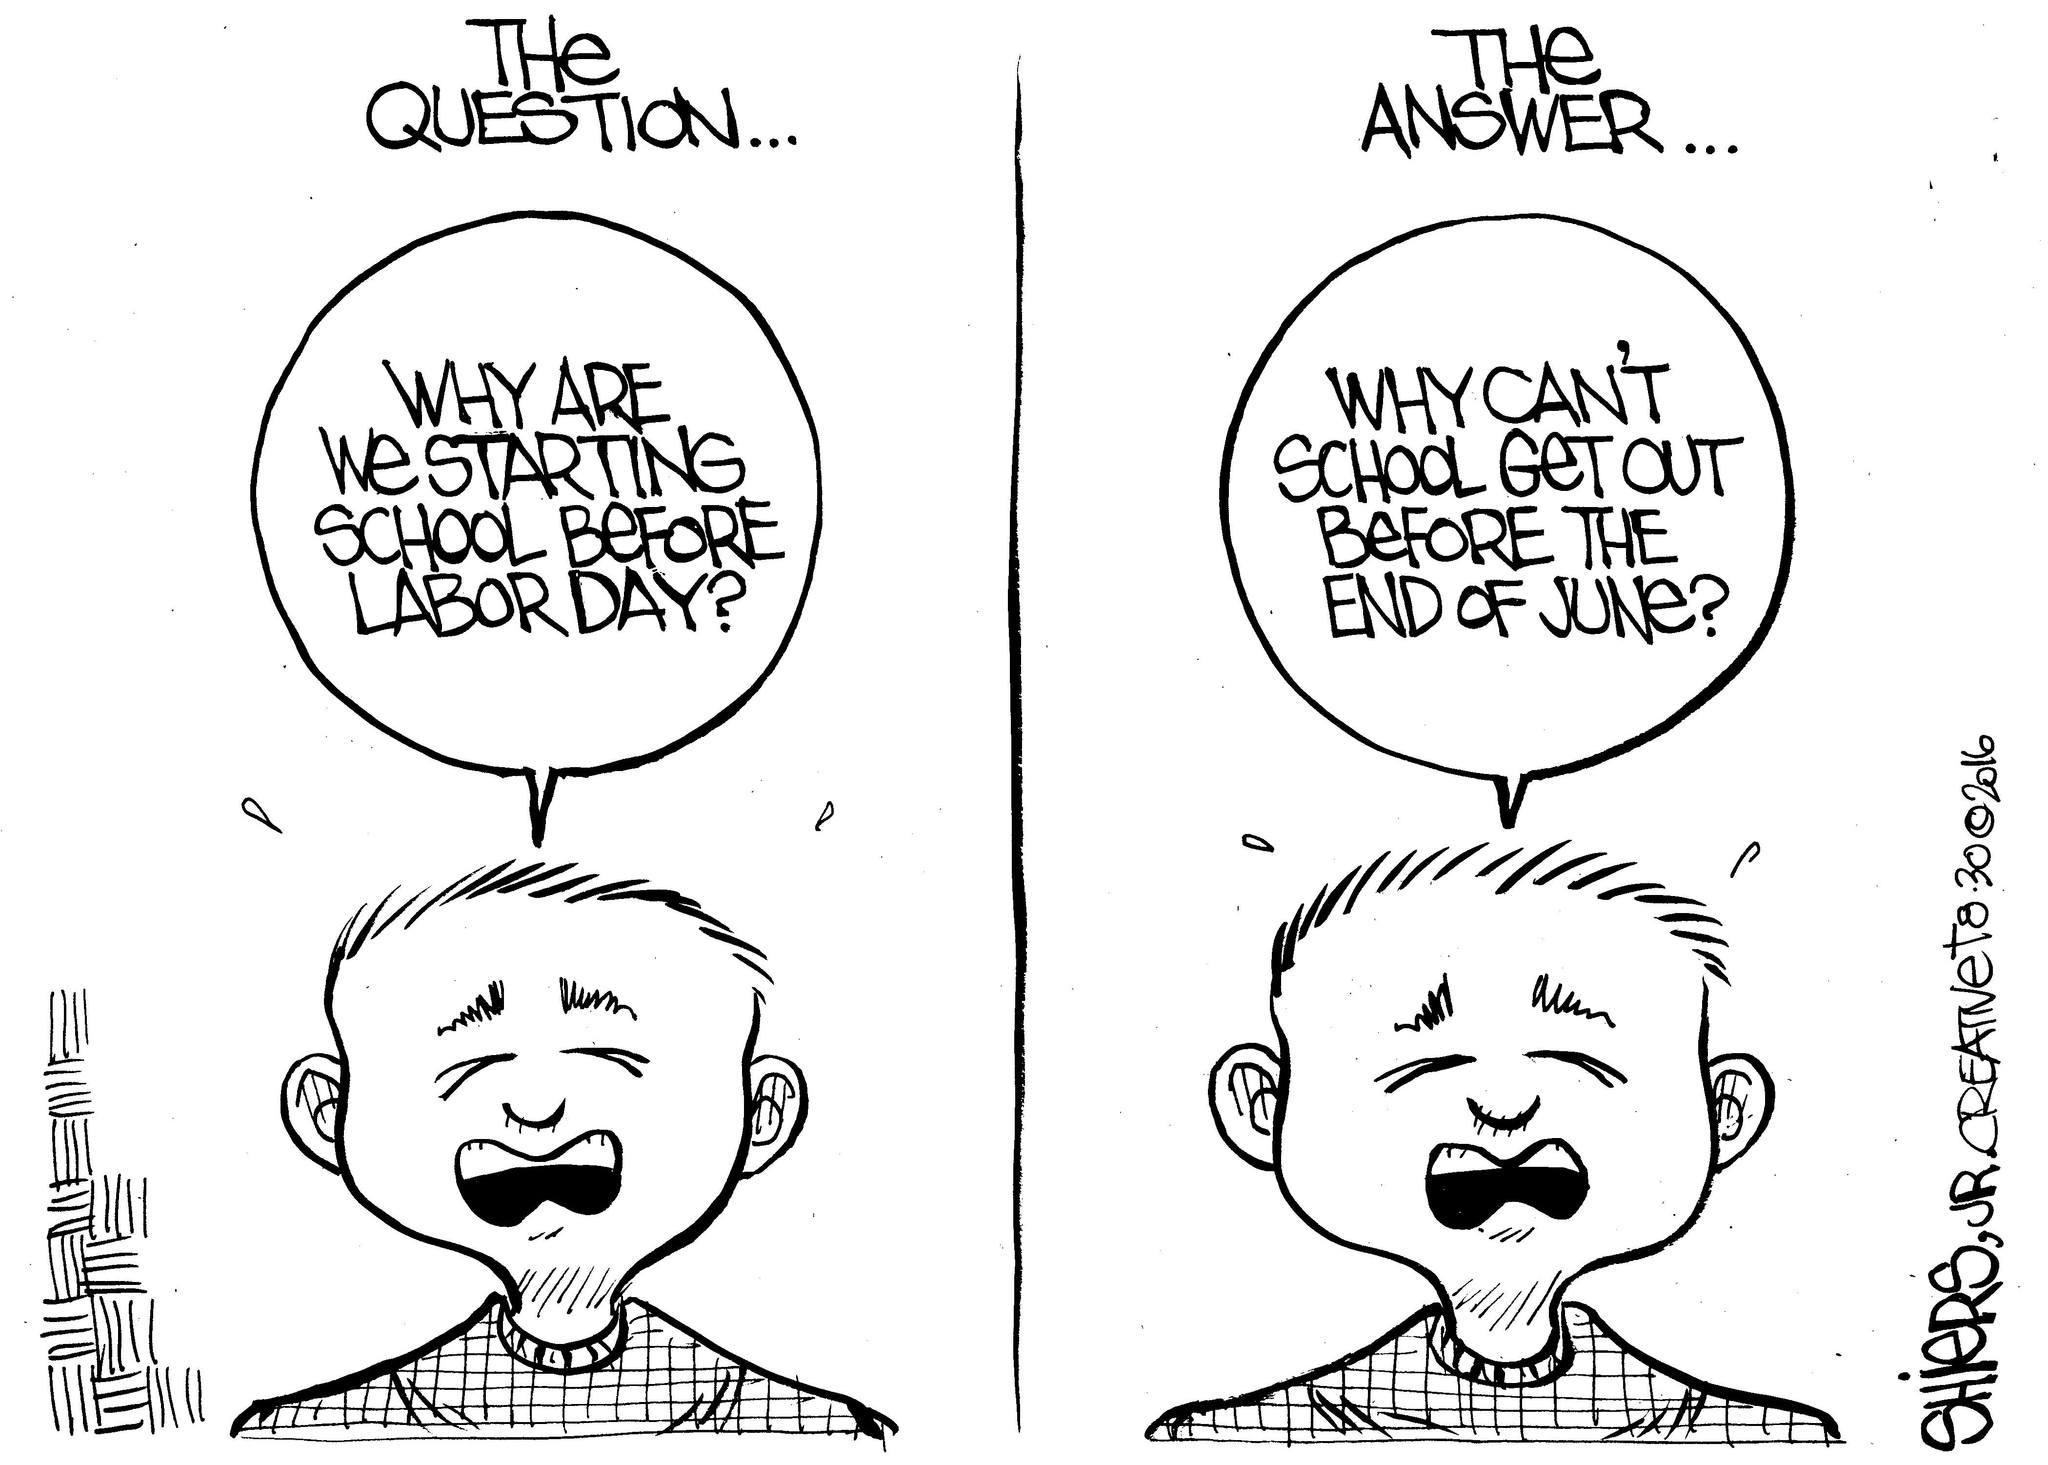 Why are we starting school before Labor Day? | Cartoon for Sept. 1 - Frank Shiers